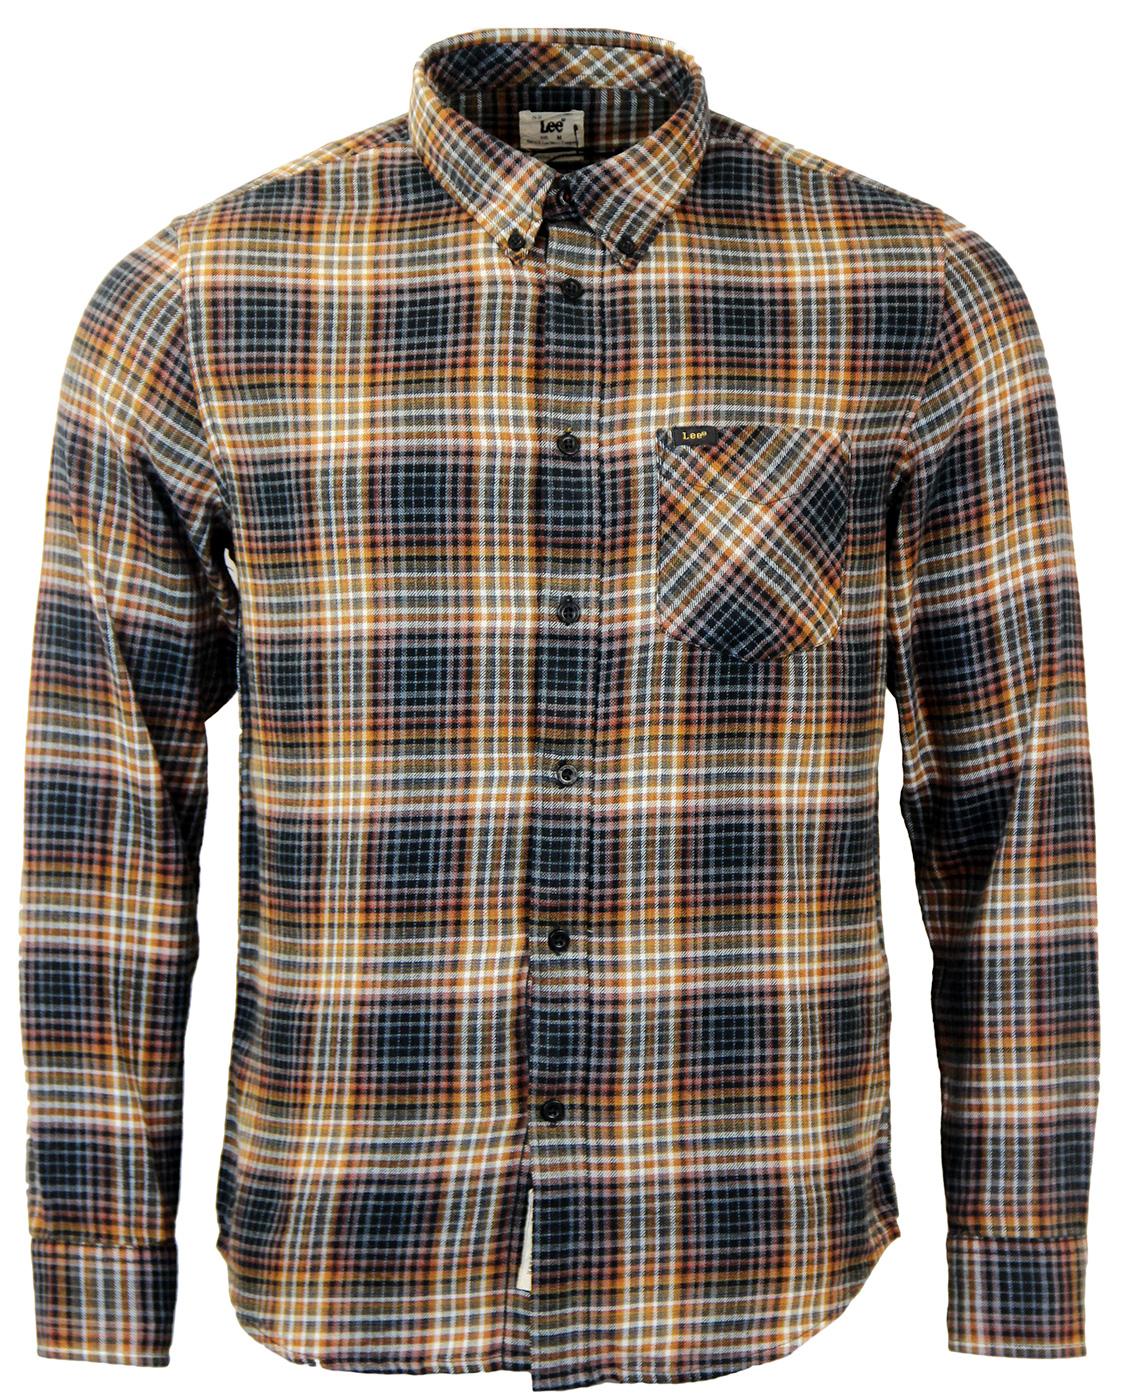 LEE JEANS Retro Mod Check Brushed Cotton Shirt